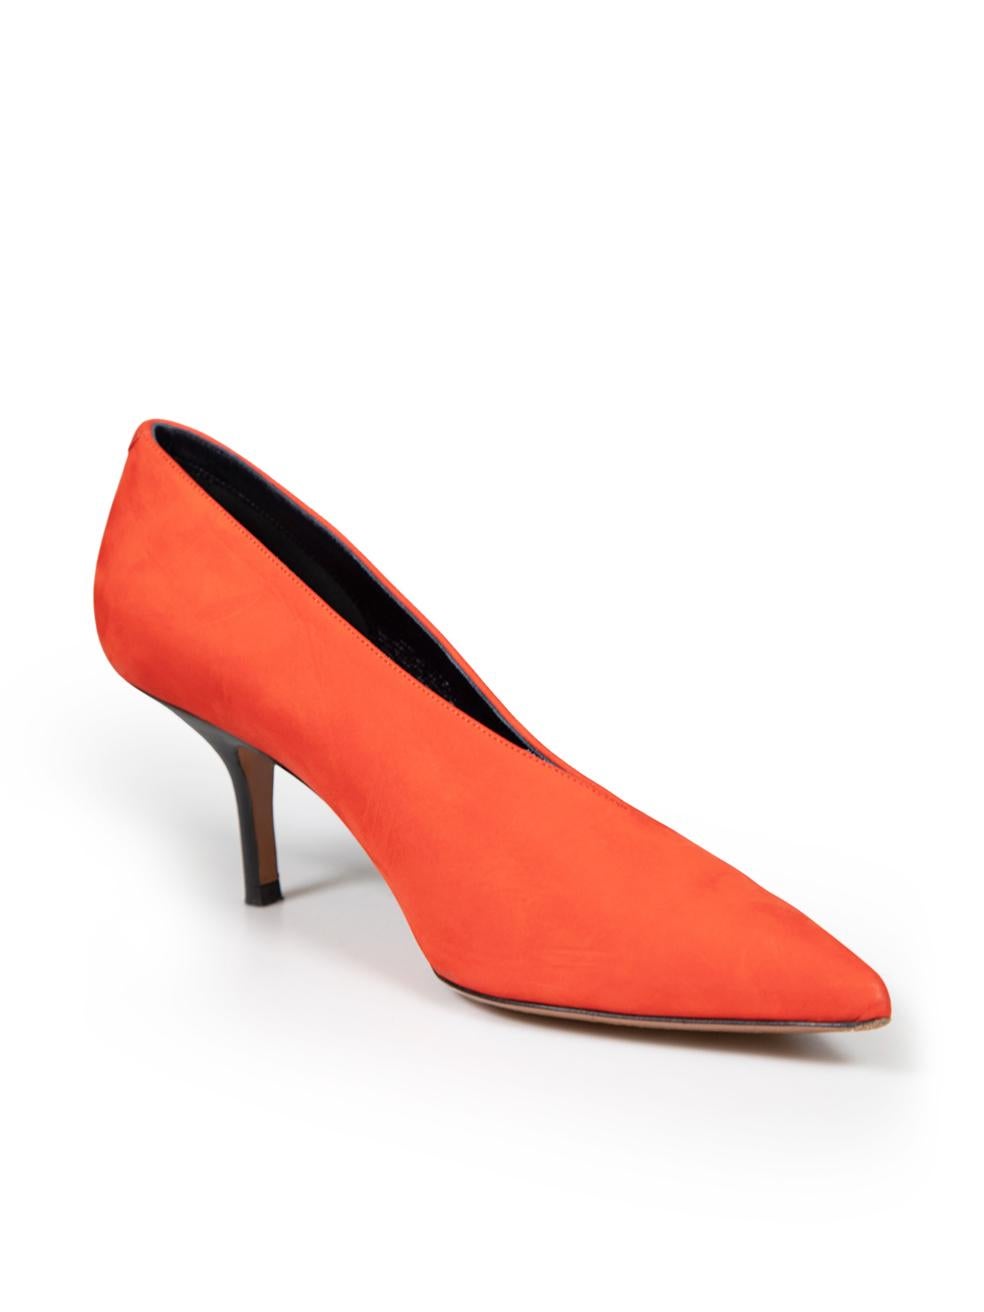 CONDITION is Very good. Minimal wear to pumps is evident. Minimal marks and abrasions to the front, back and sides of both shoes. Abrasion is seen on the left heel on this used Céline designer resale item.
 
 
 
 Details
 
 
 Orange
 
 Suede
 
